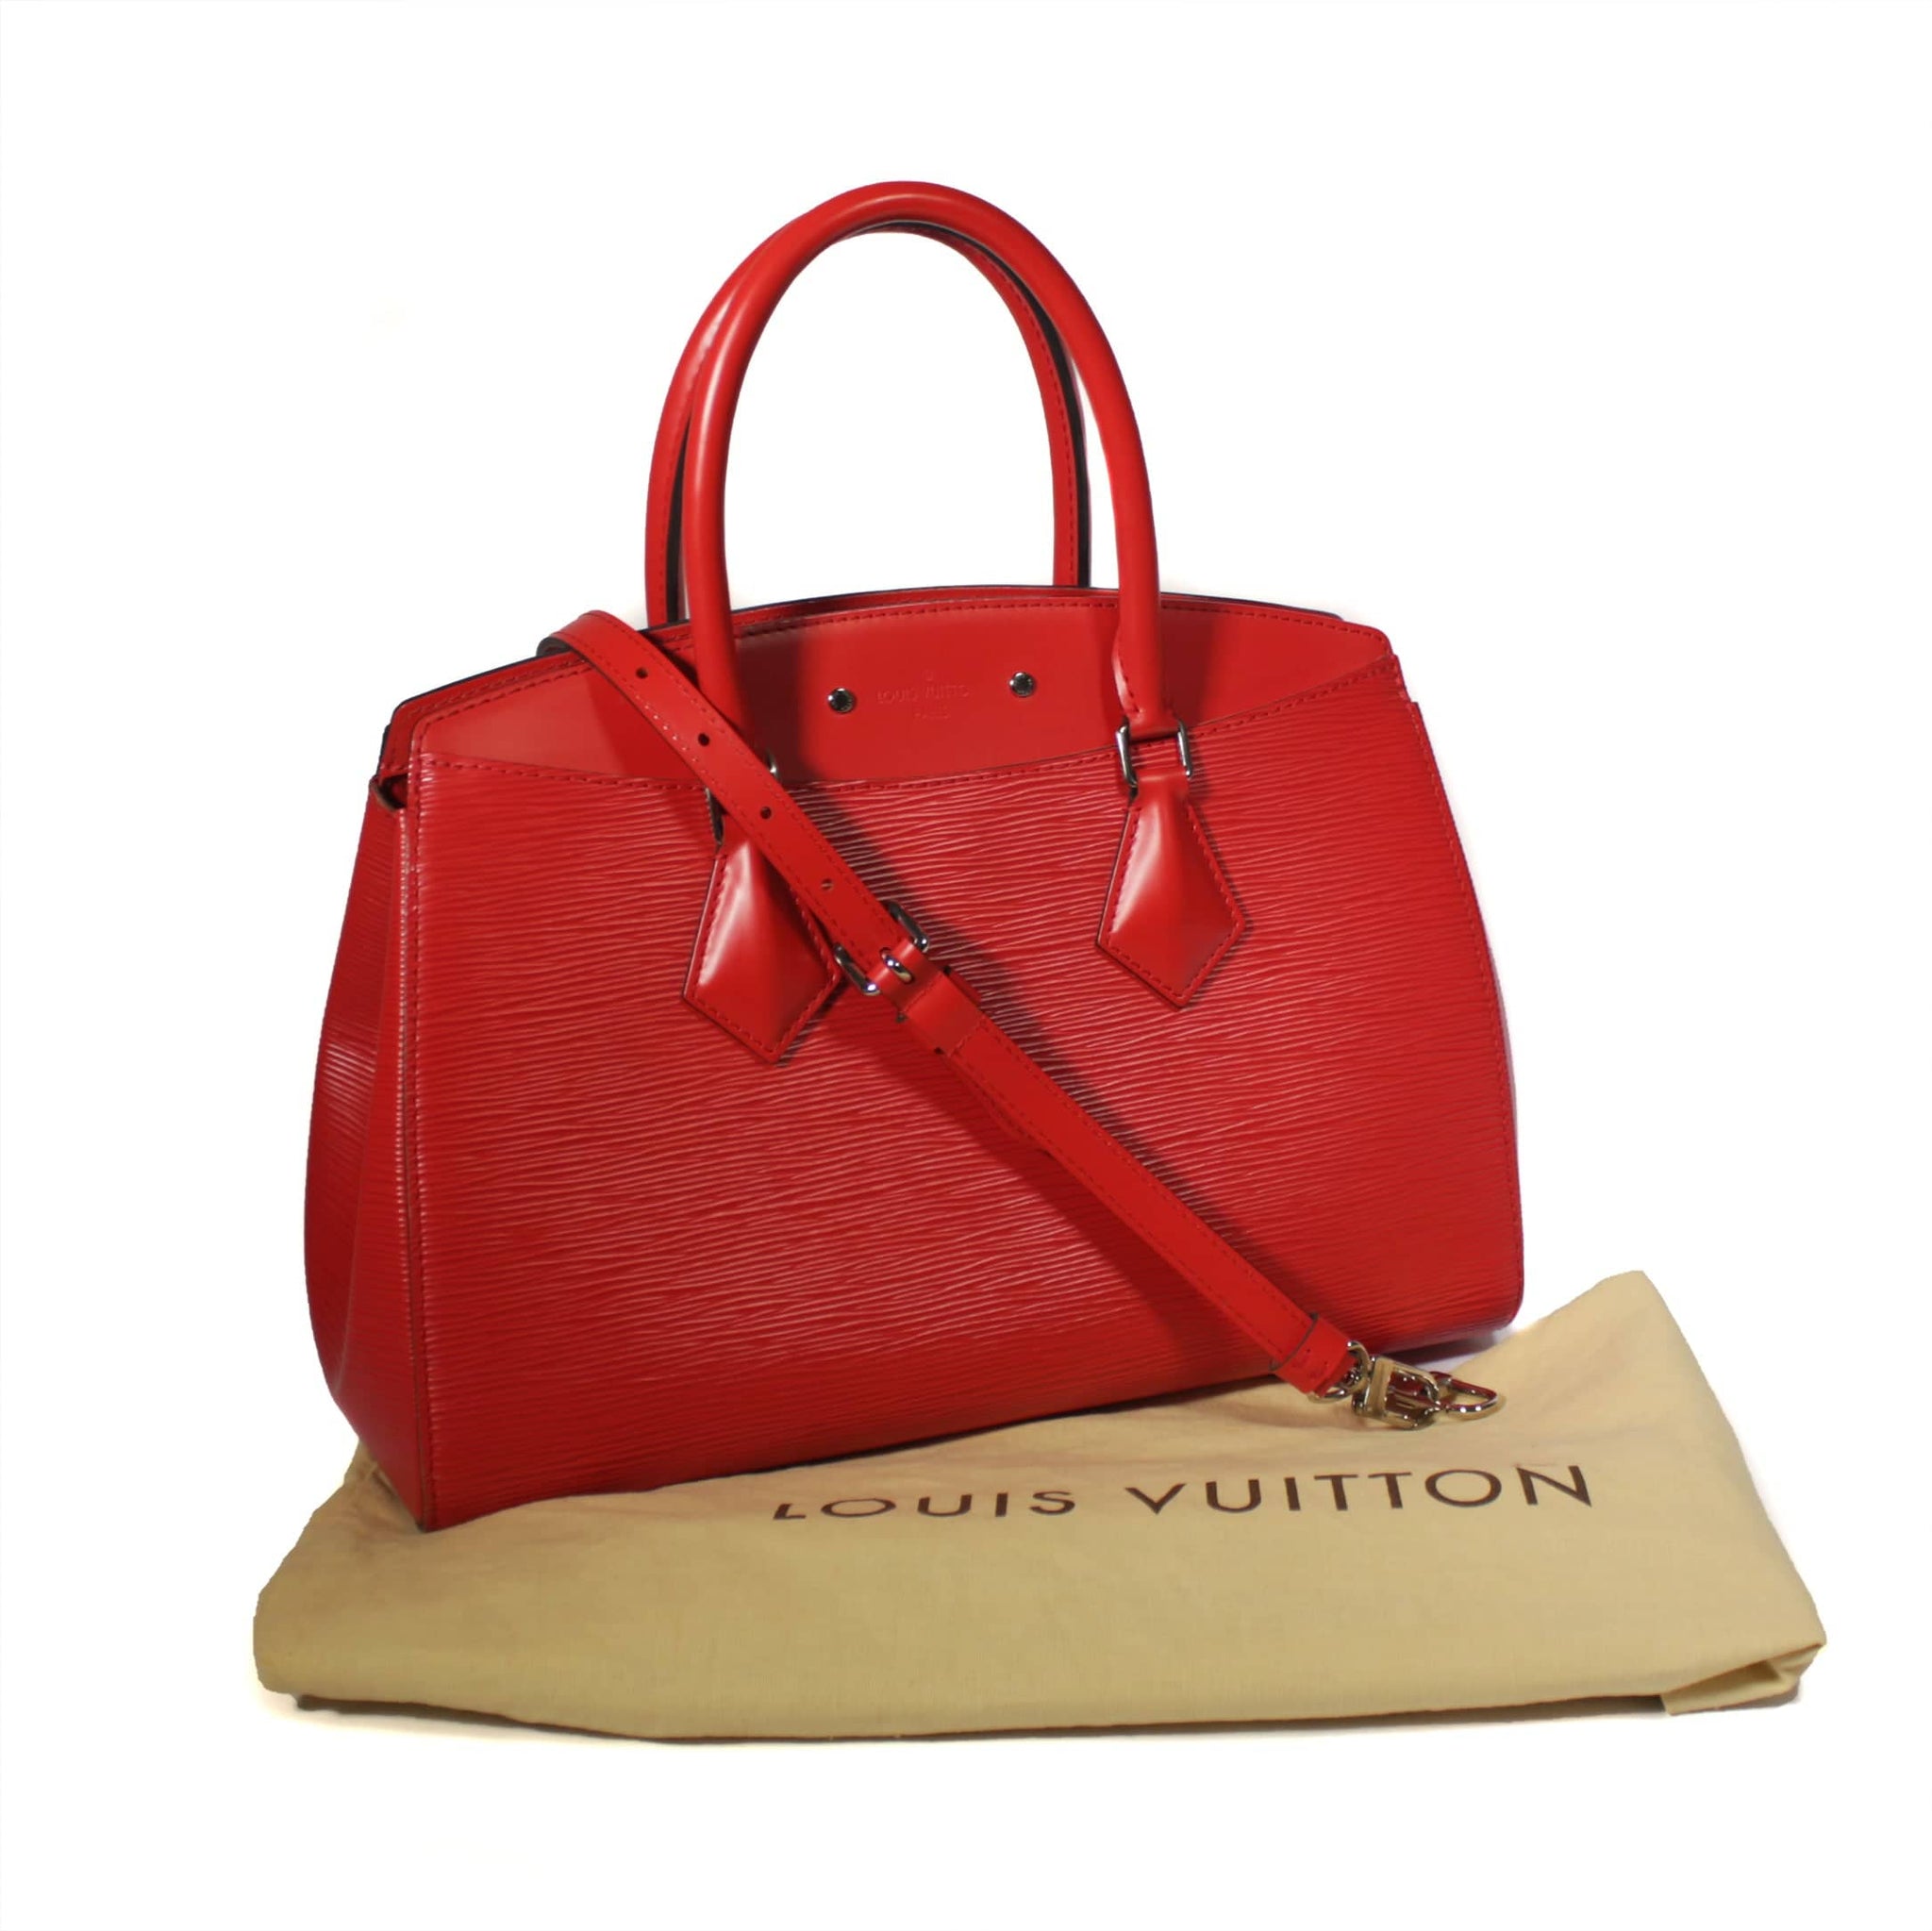 The Vuitton Cabas Mezzo from Hell